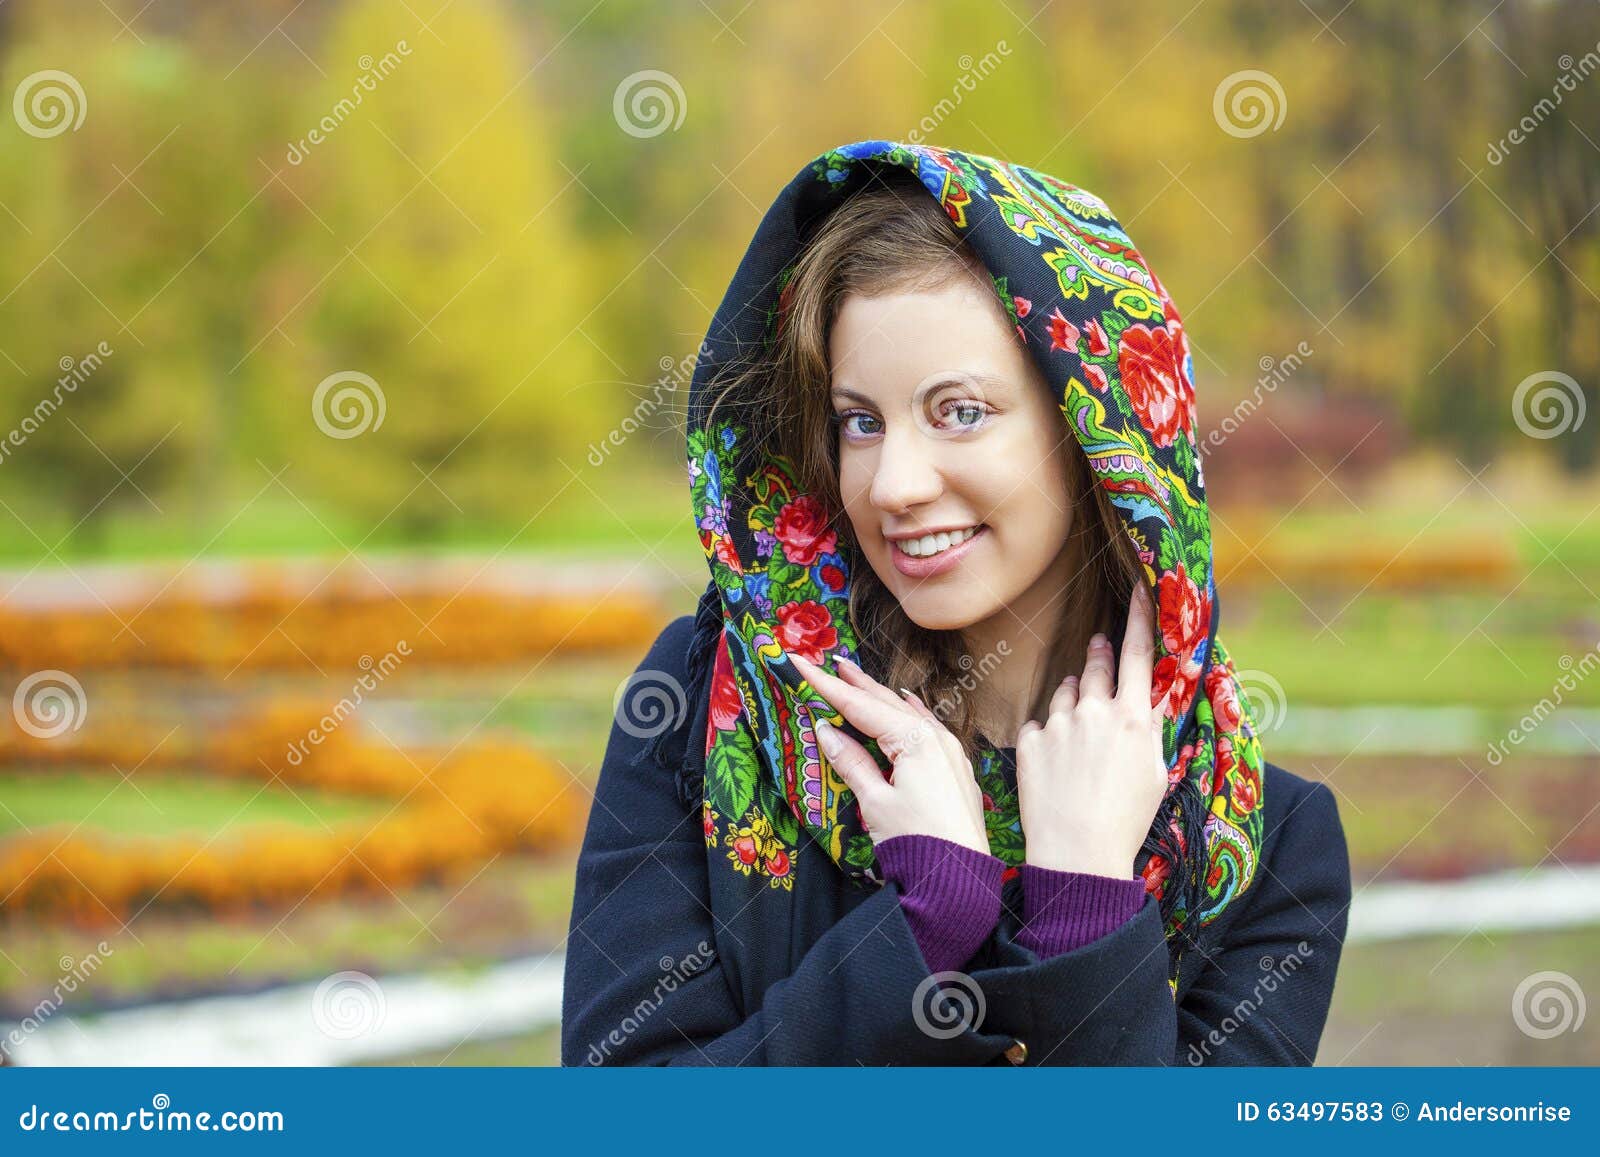 young italians in coat and knit a scarf on her head